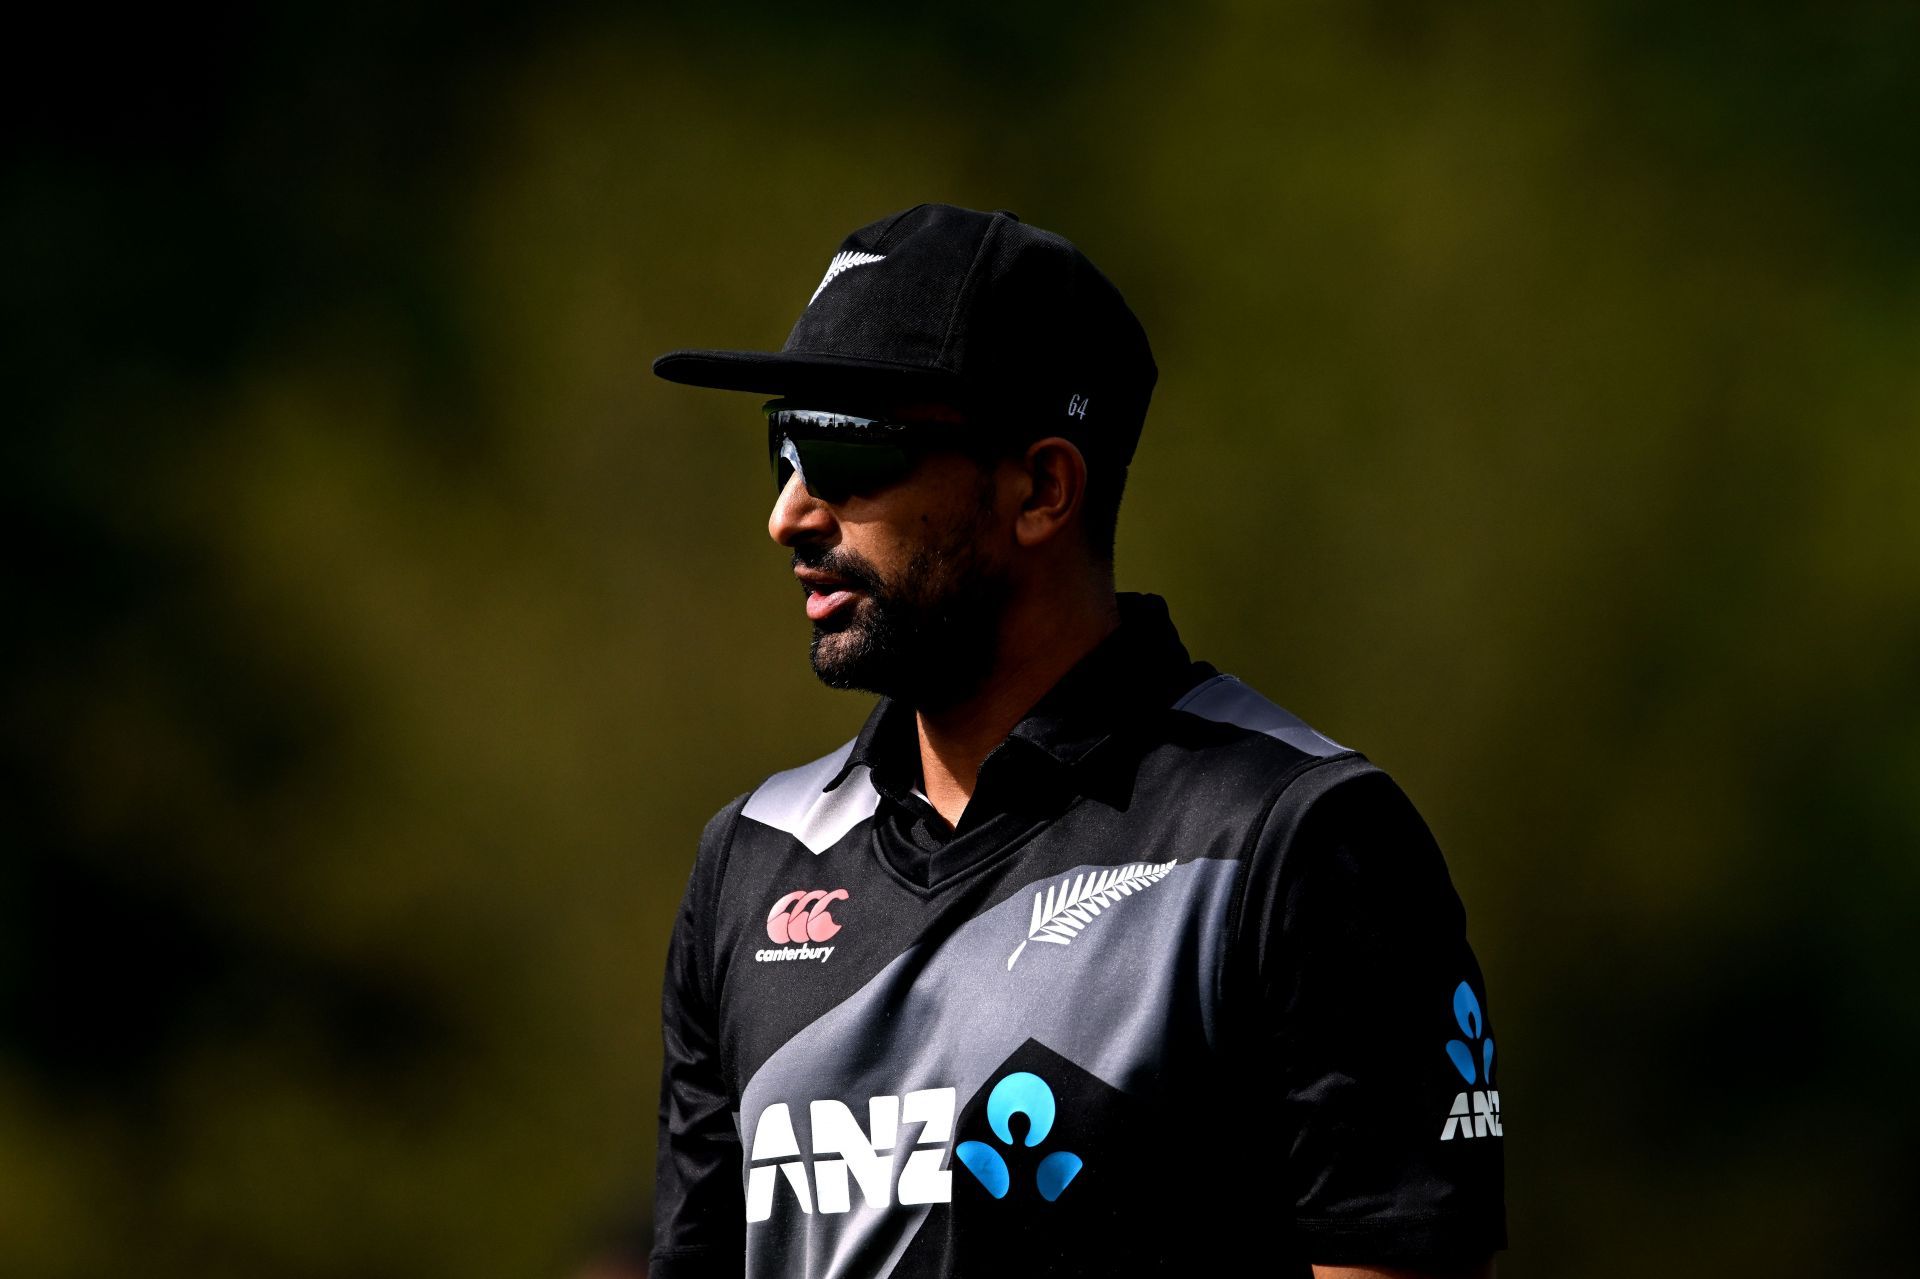 Ish Sodhi has been a regular for the New Zealand team (Image: Getty)